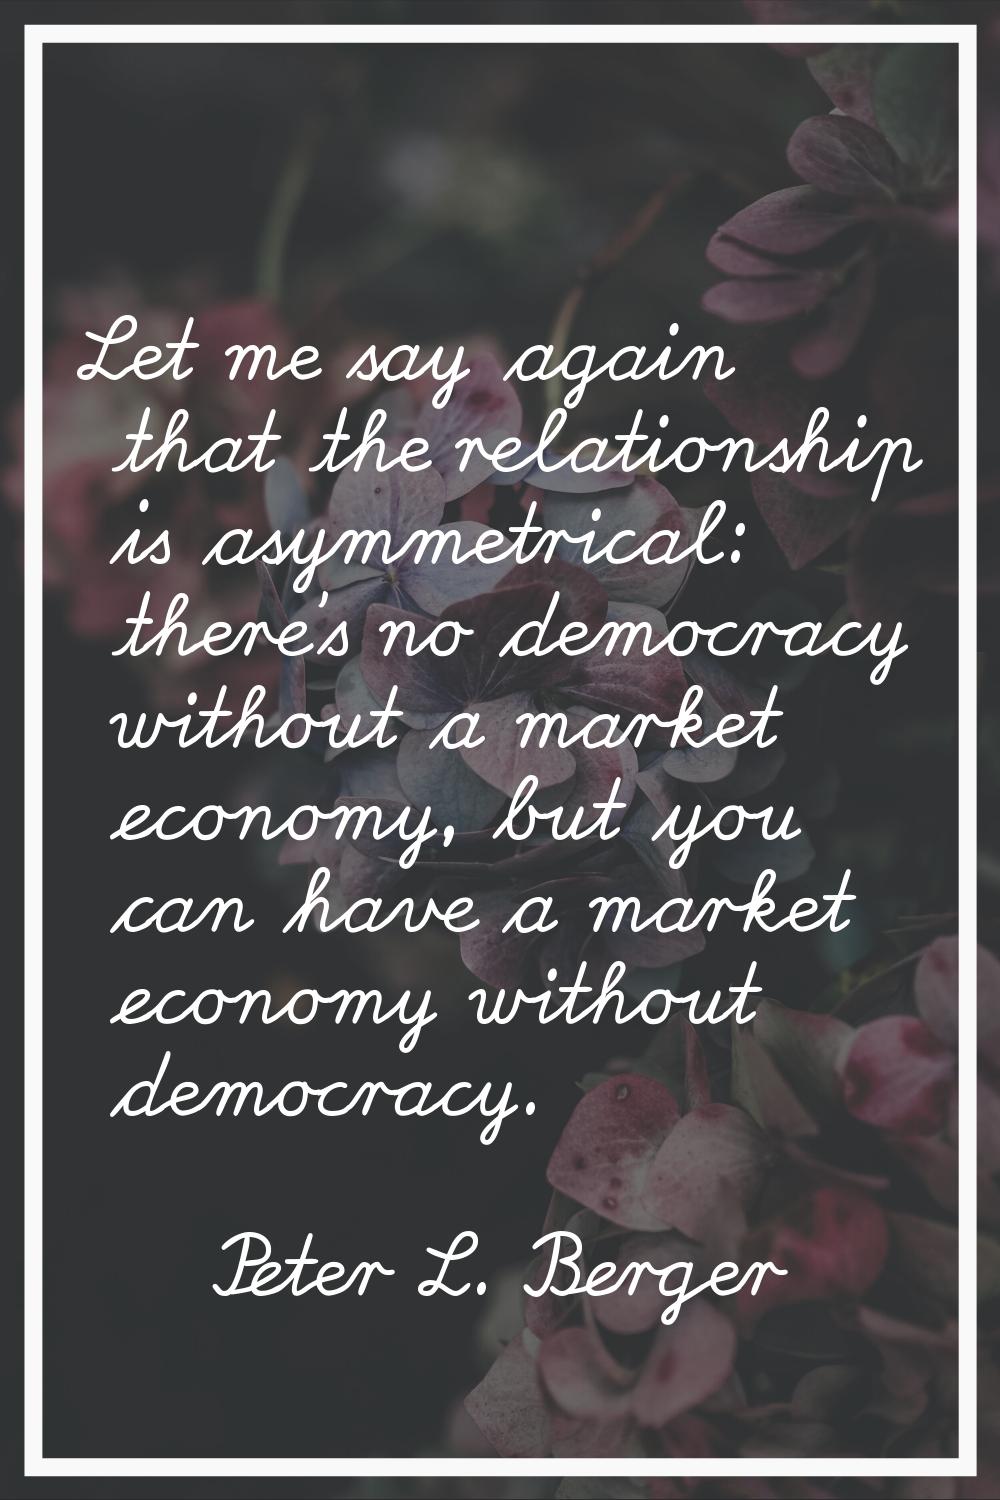 Let me say again that the relationship is asymmetrical: there's no democracy without a market econo